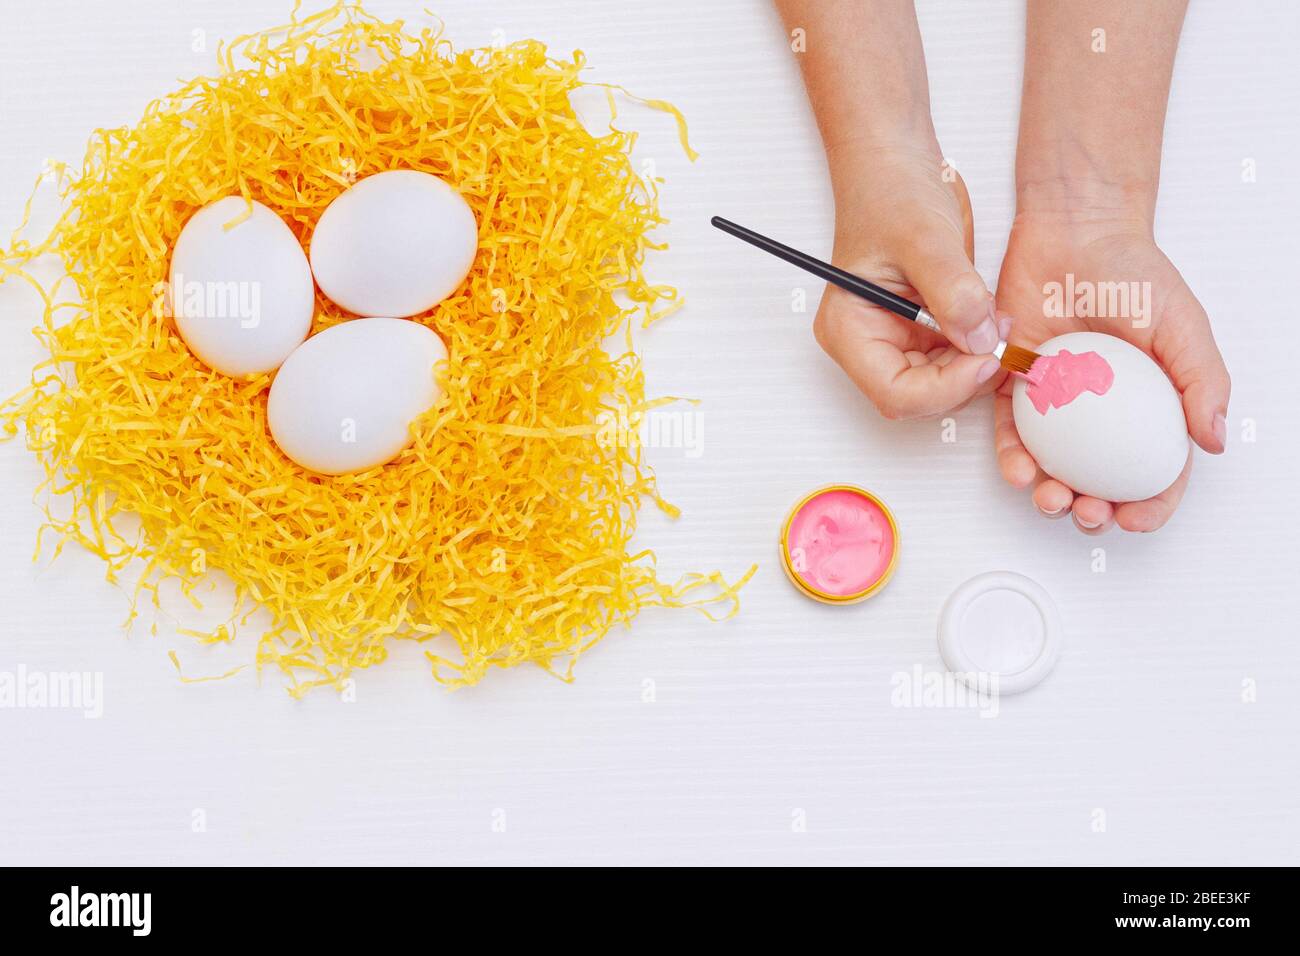 Happy easter! child's hand painting Easter eggs on wooden white table. Painting eggs for easter holiday celebration. Stock Photo